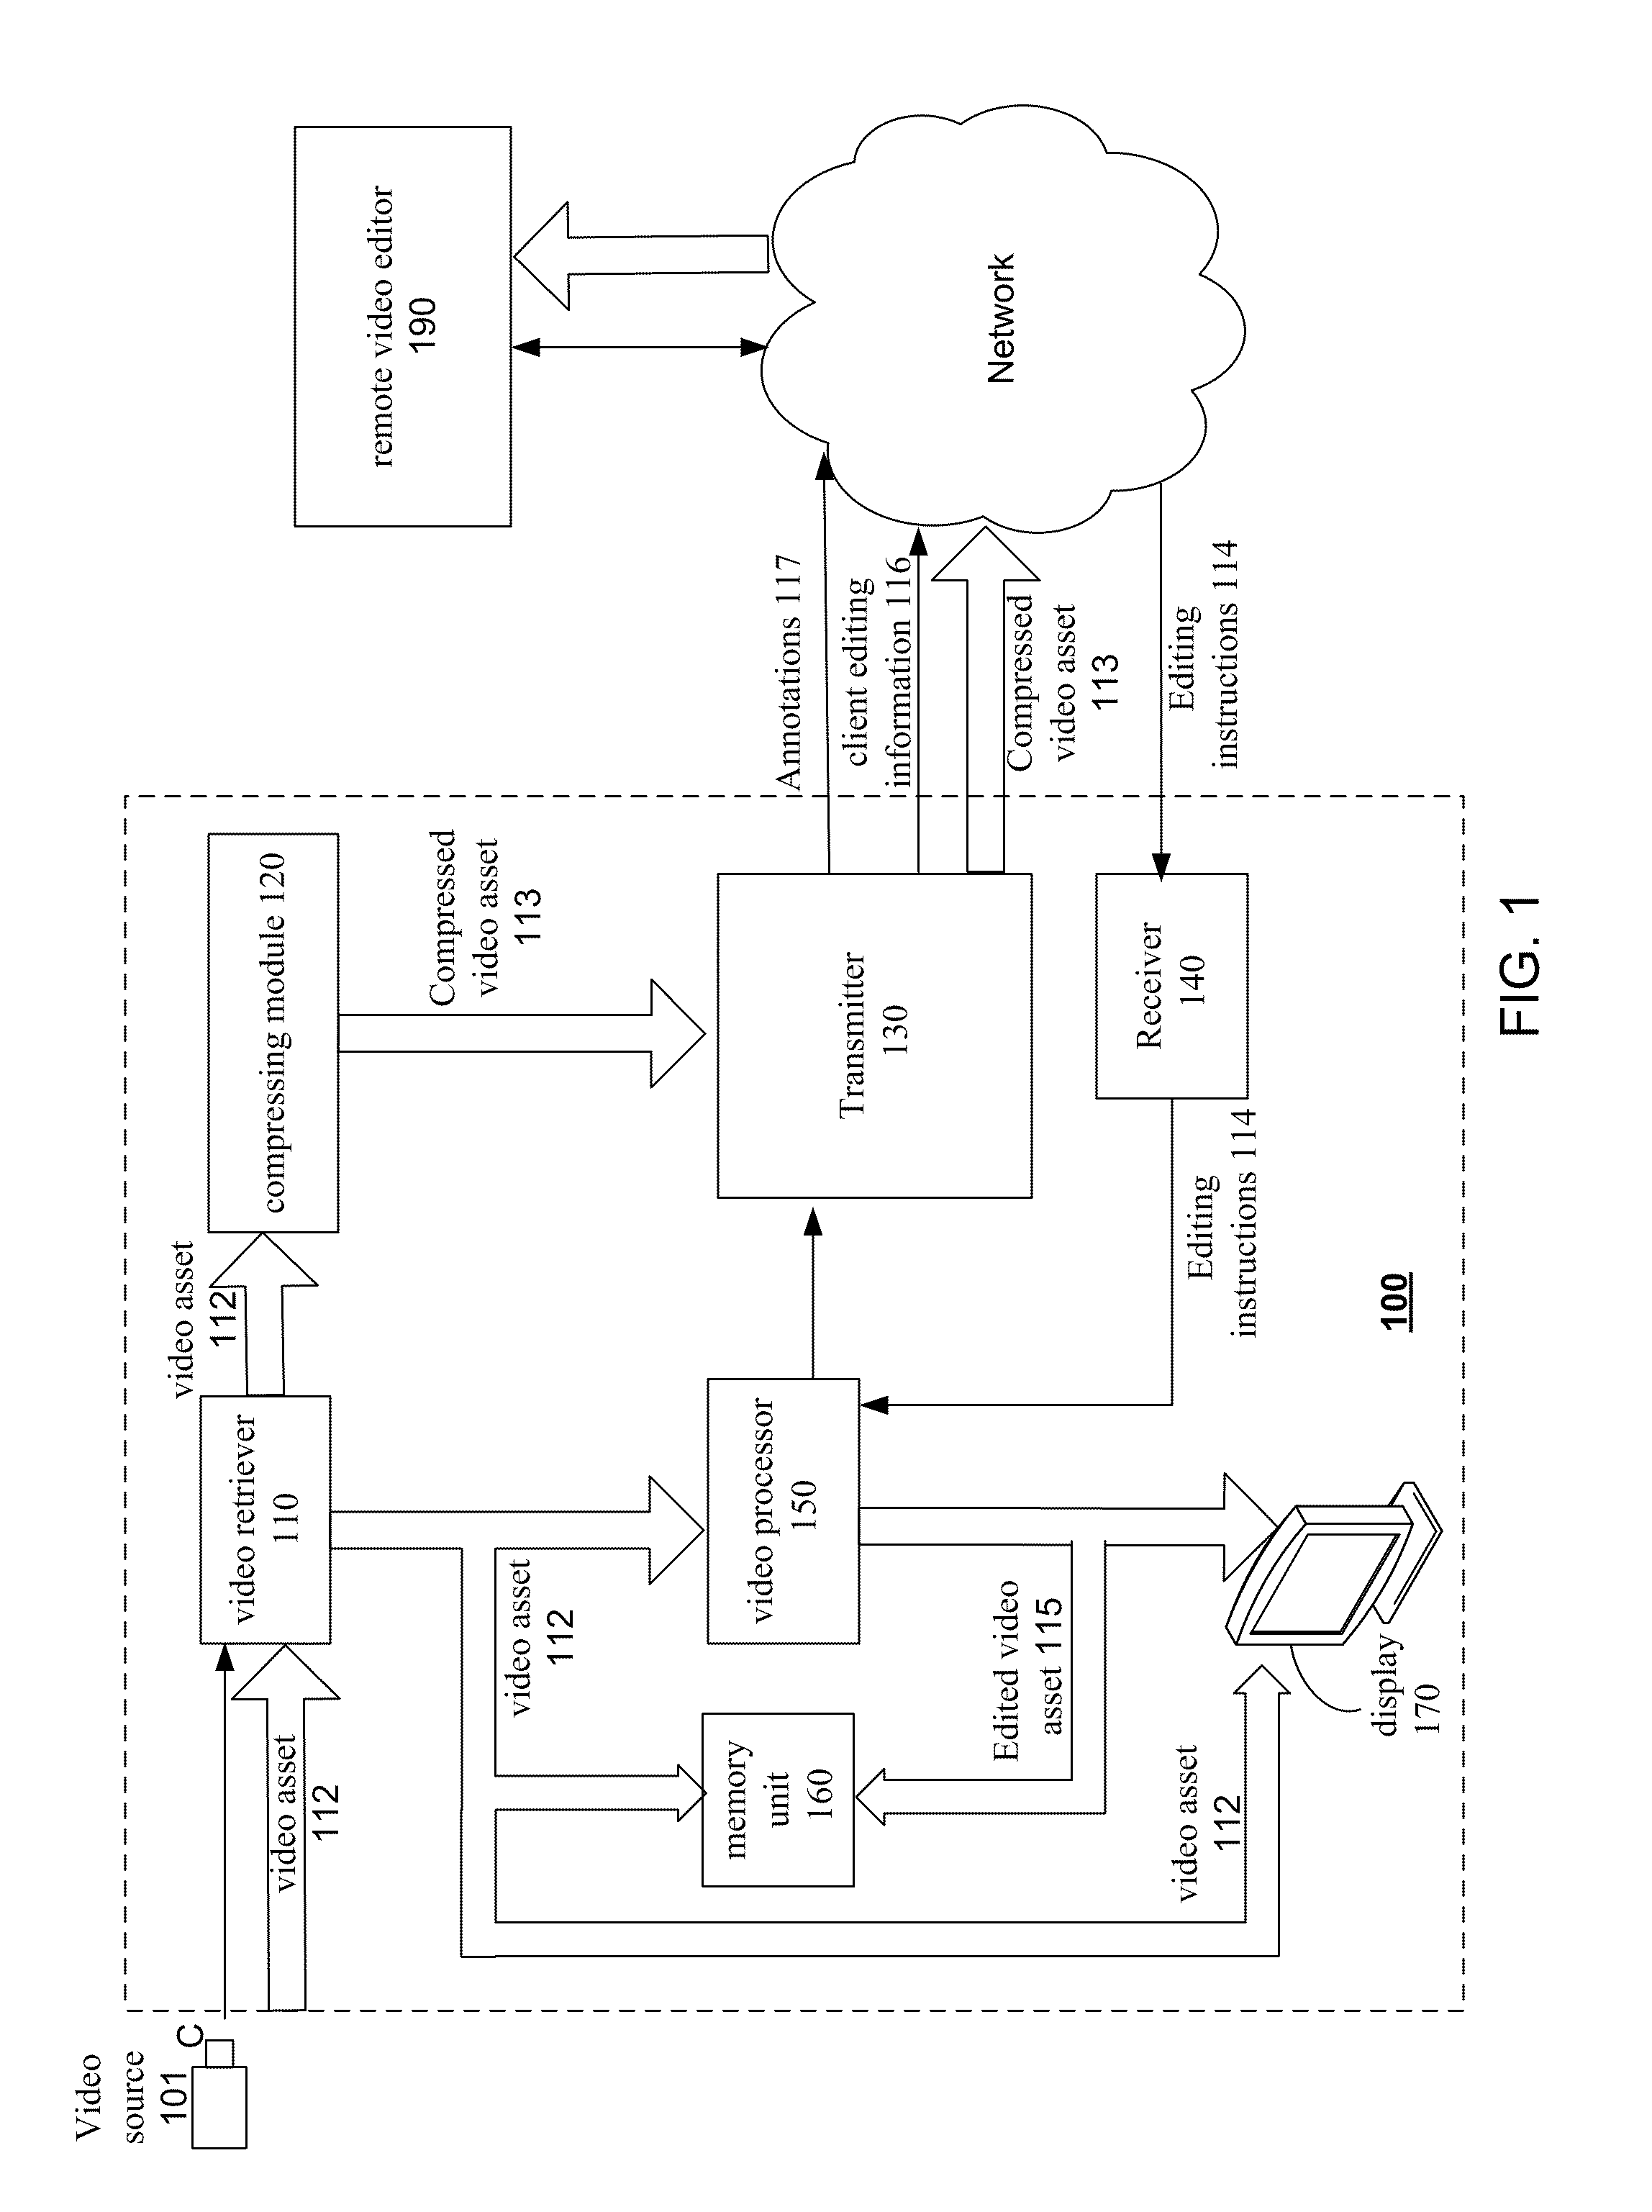 Video processing system and a method for editing a video asset